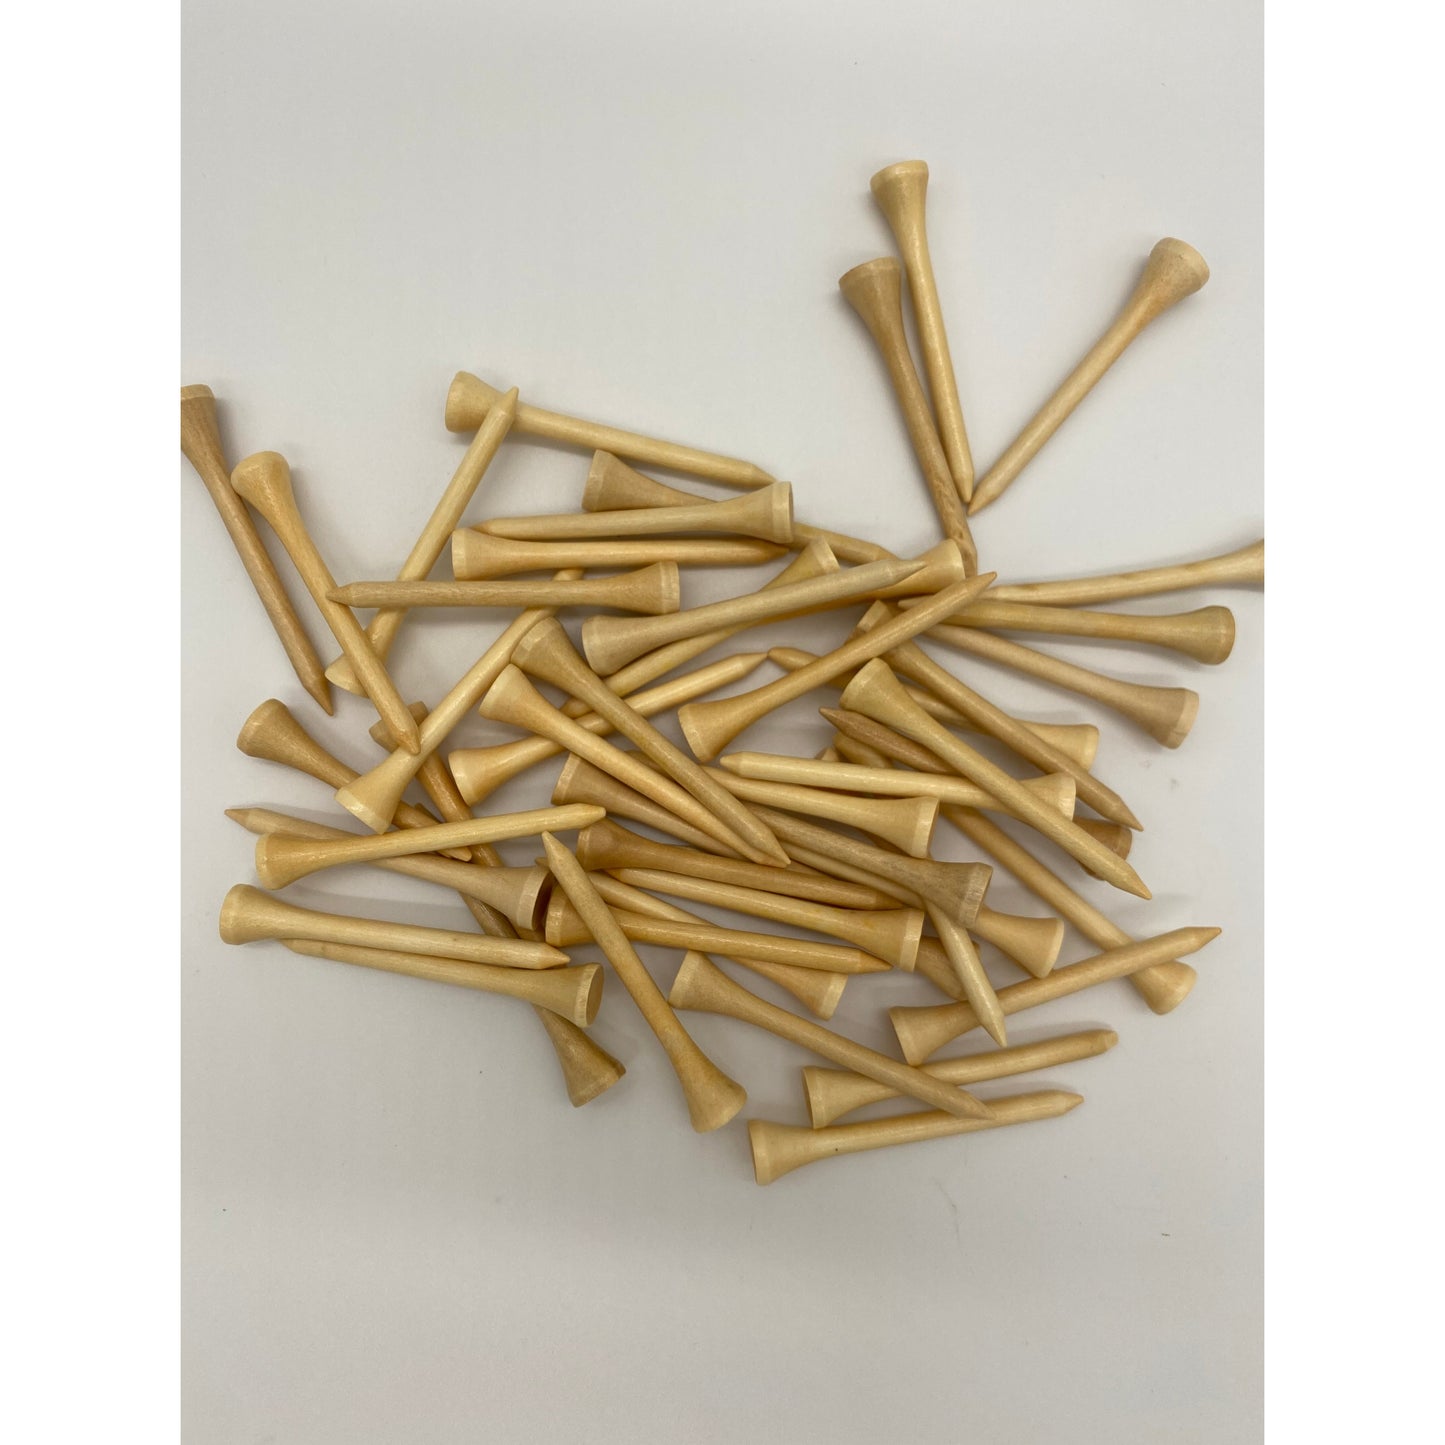 2 1/8” Wood Tracer Tees - Standard Size